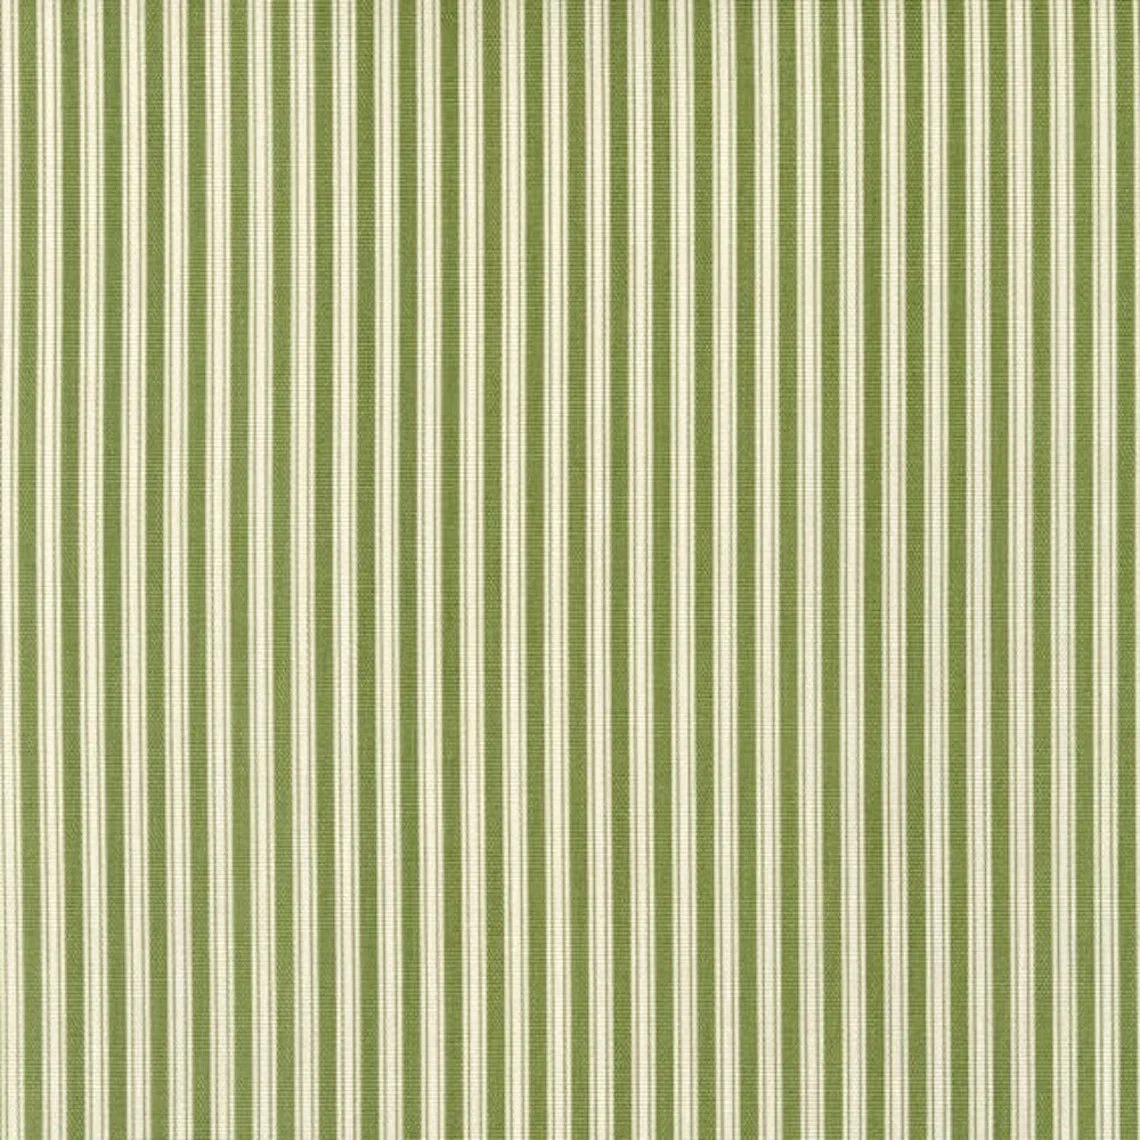 rod pocket curtain panels pair in polo jungle green stripe on cream